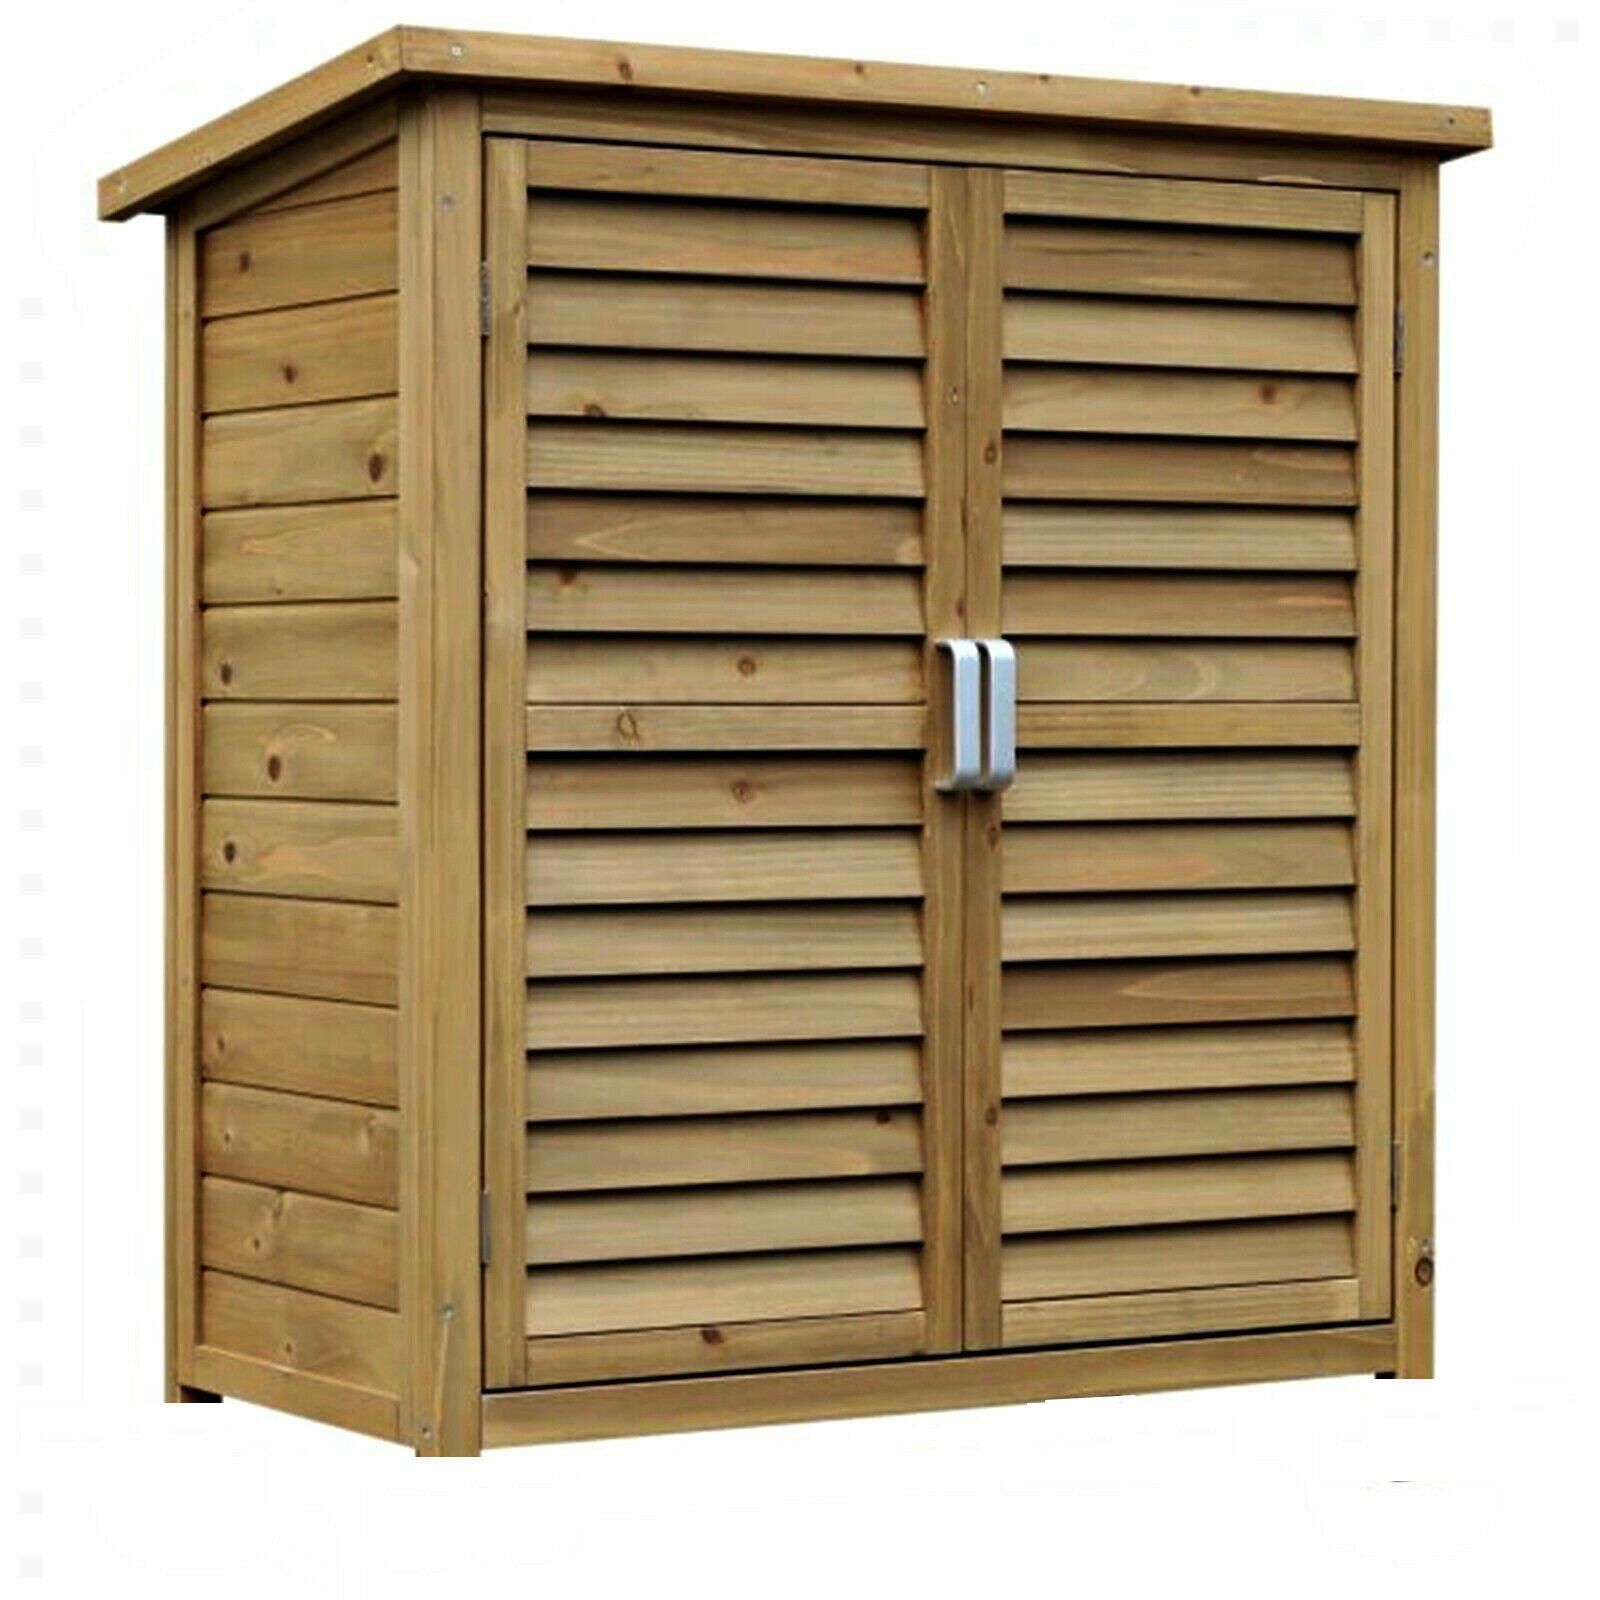 Large Portable Wooden Outdoor Garden Lawn Cabinet Shed Shelf Cupboard